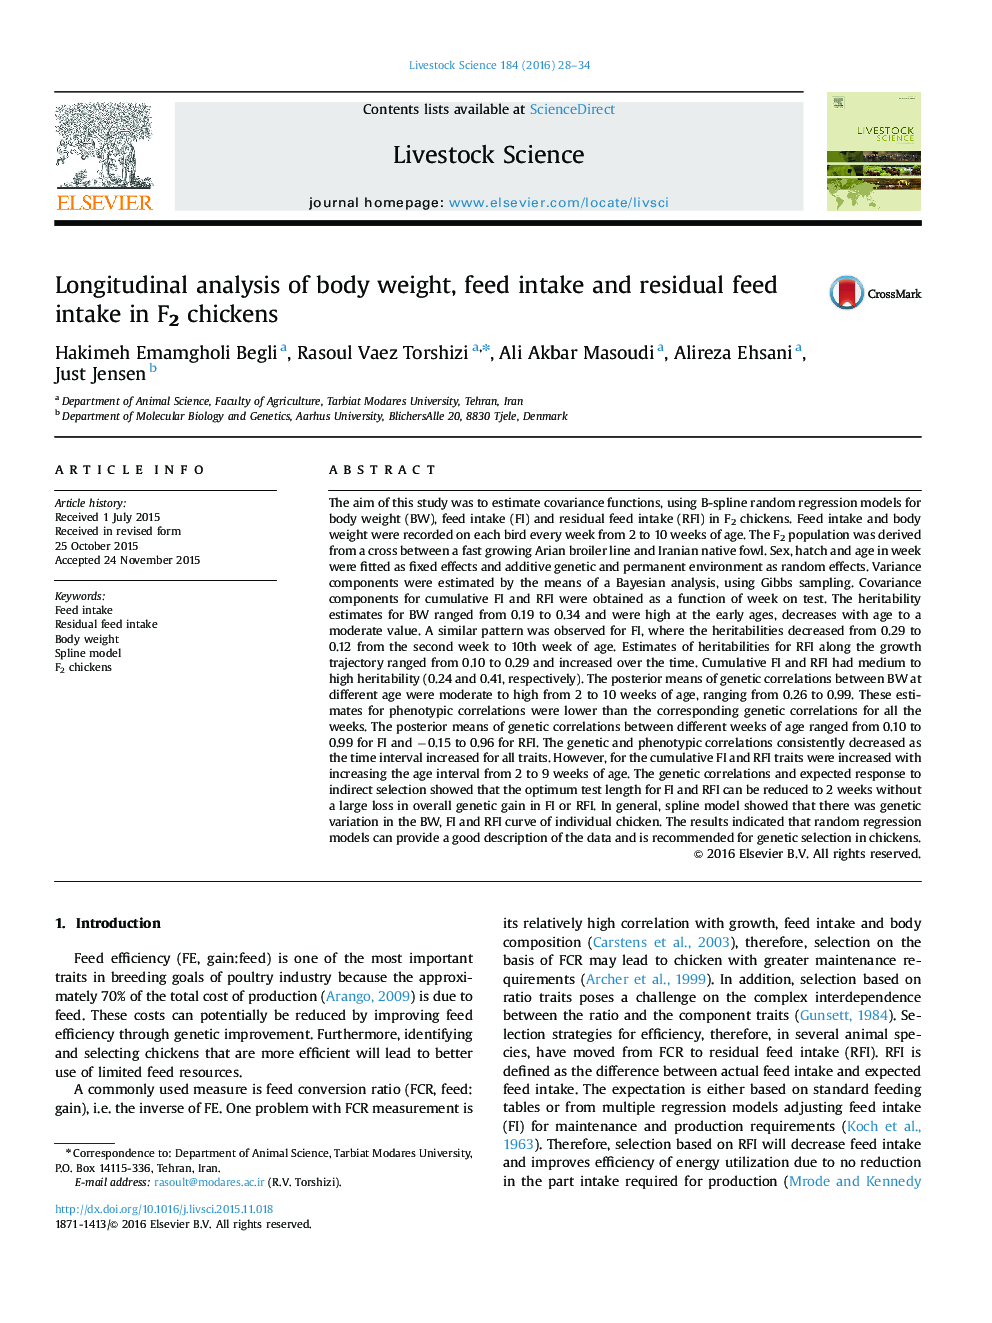 Longitudinal analysis of body weight, feed intake and residual feed intake in F2 chickens